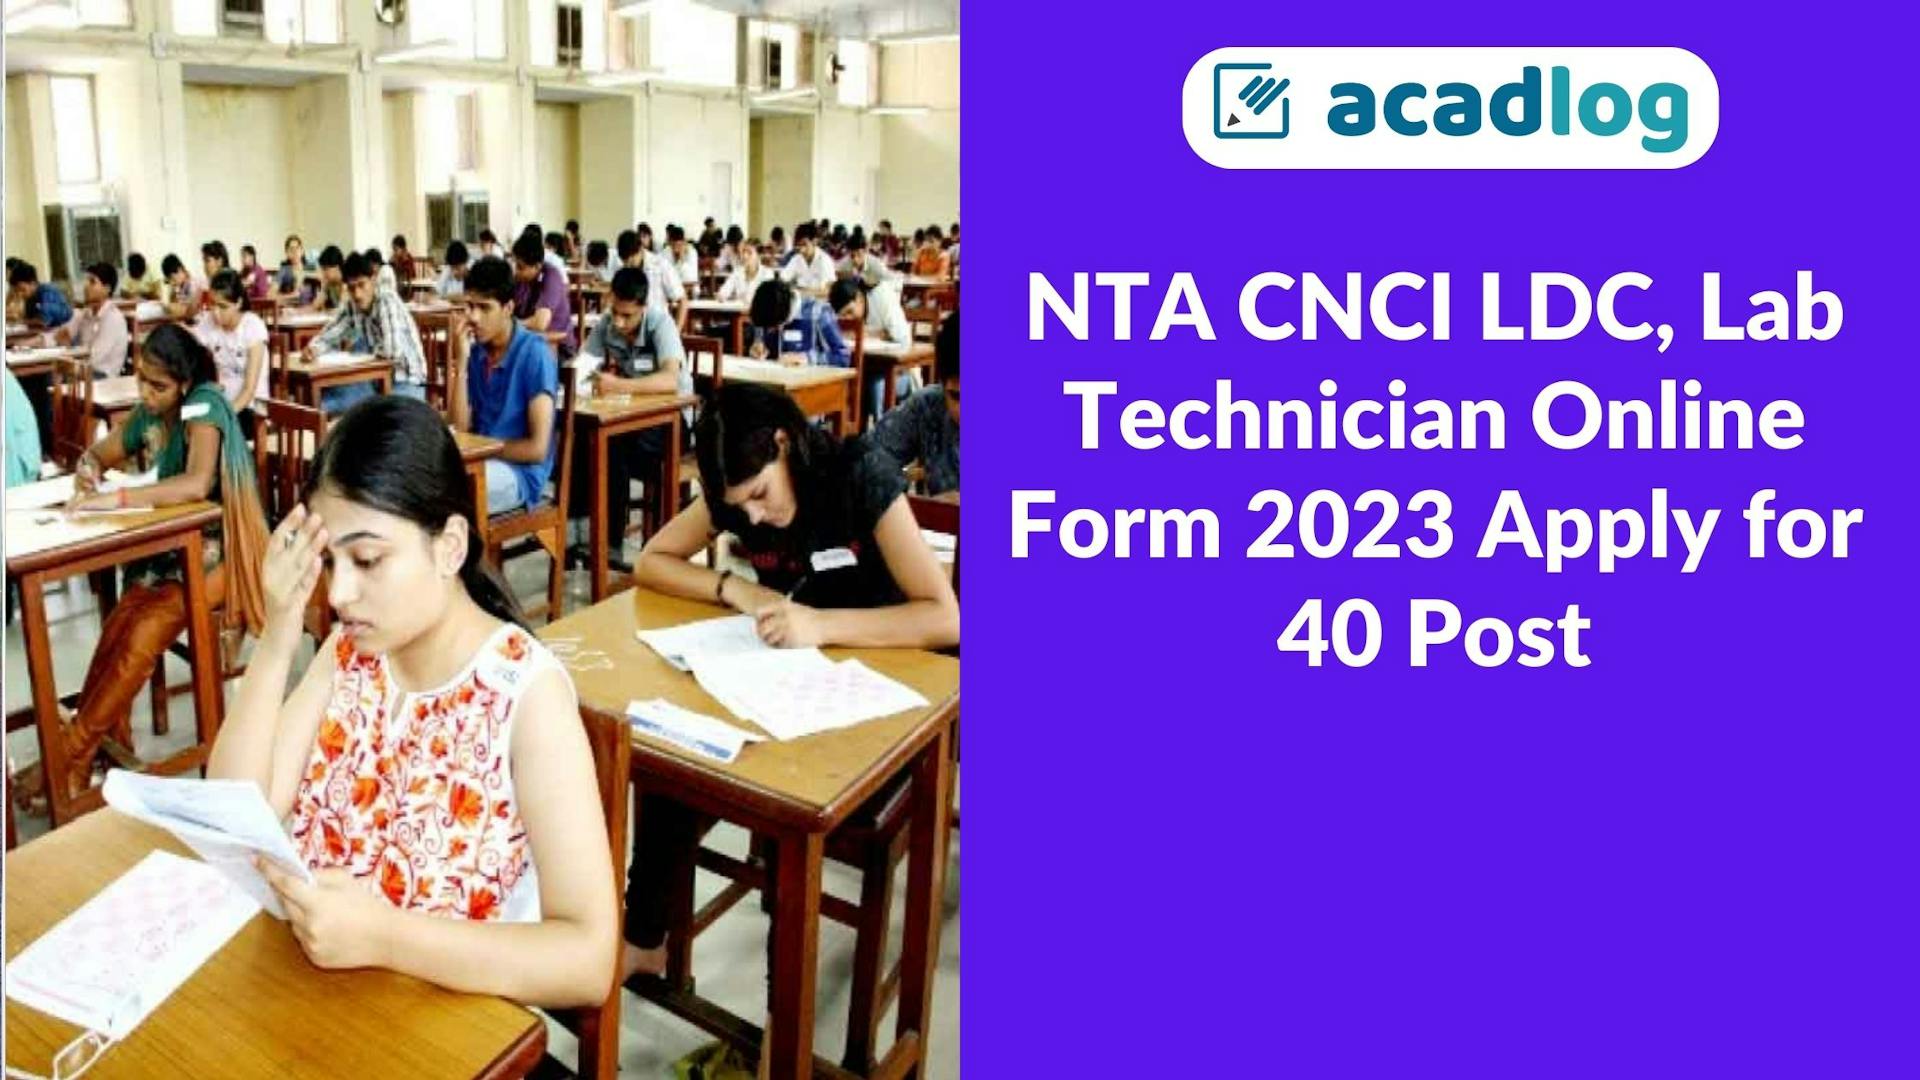 NTA Chittaranjan National Cancer Institute LDC and Lab Technician Recruitment 2023 Apply Online for 40 Post